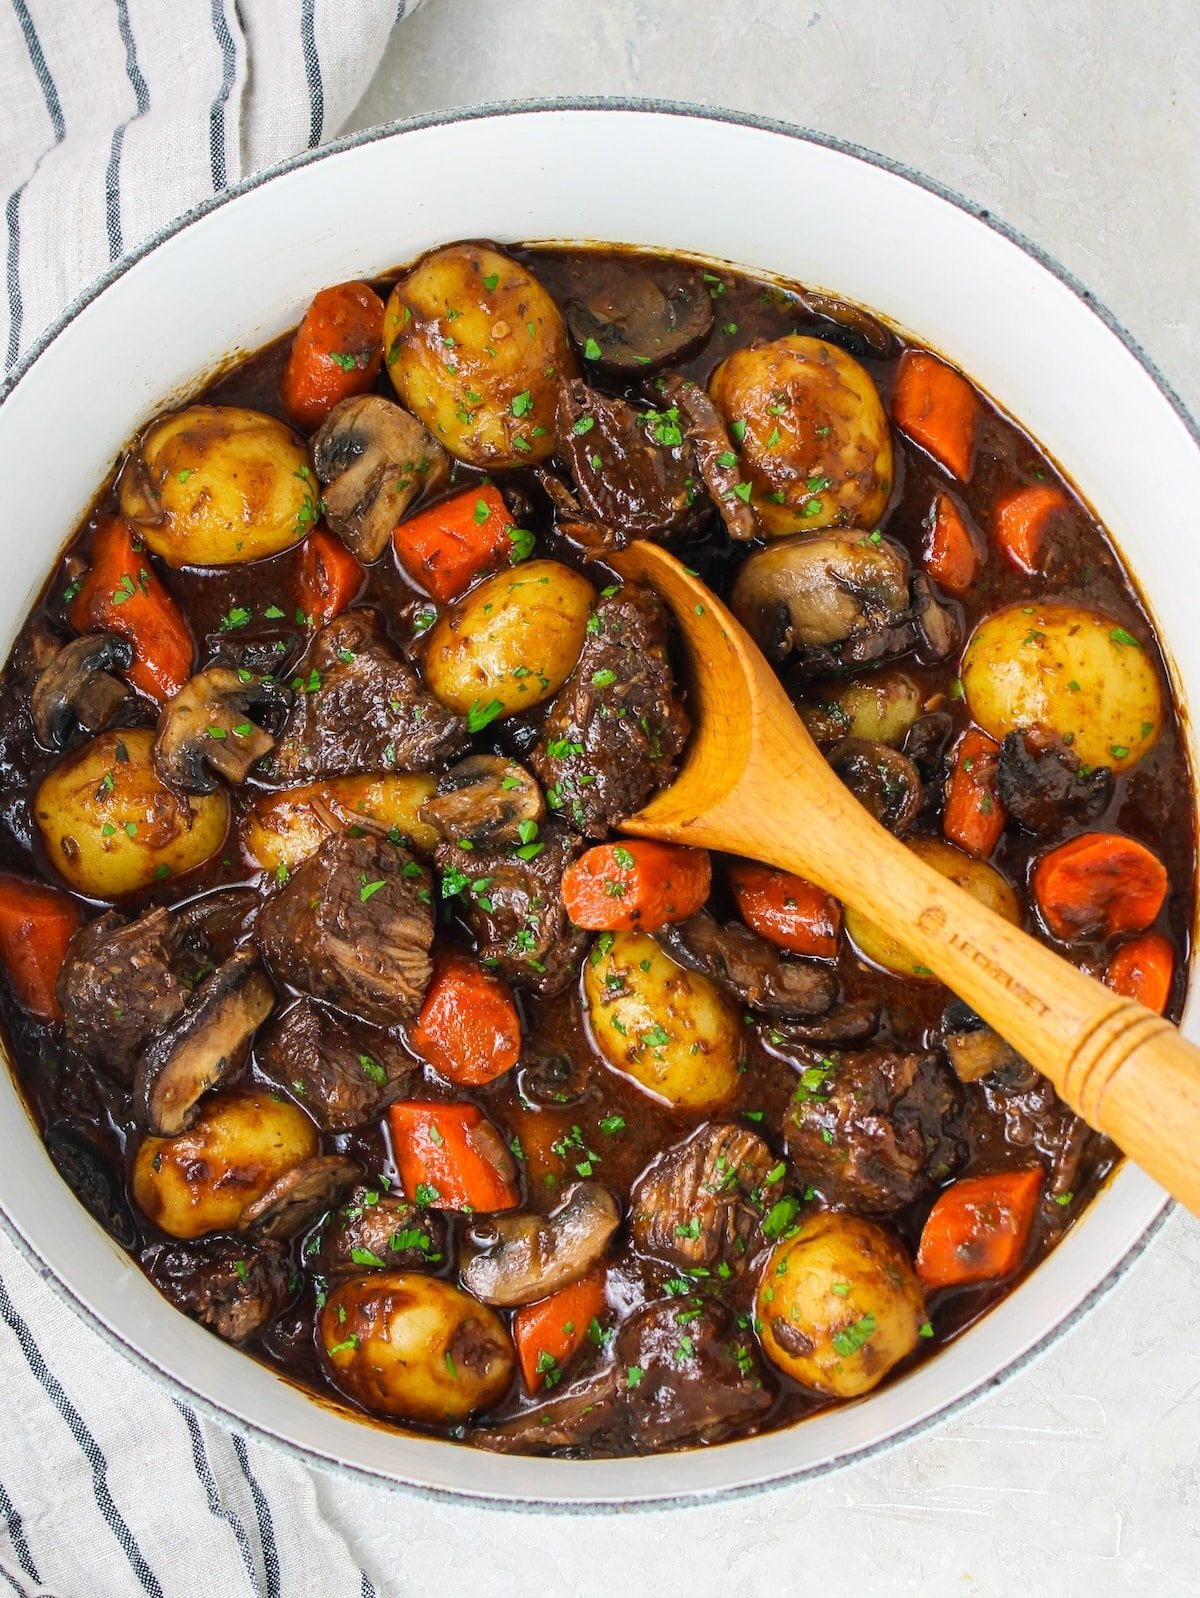 Beef stew with mushrooms cooked and ready to eat.